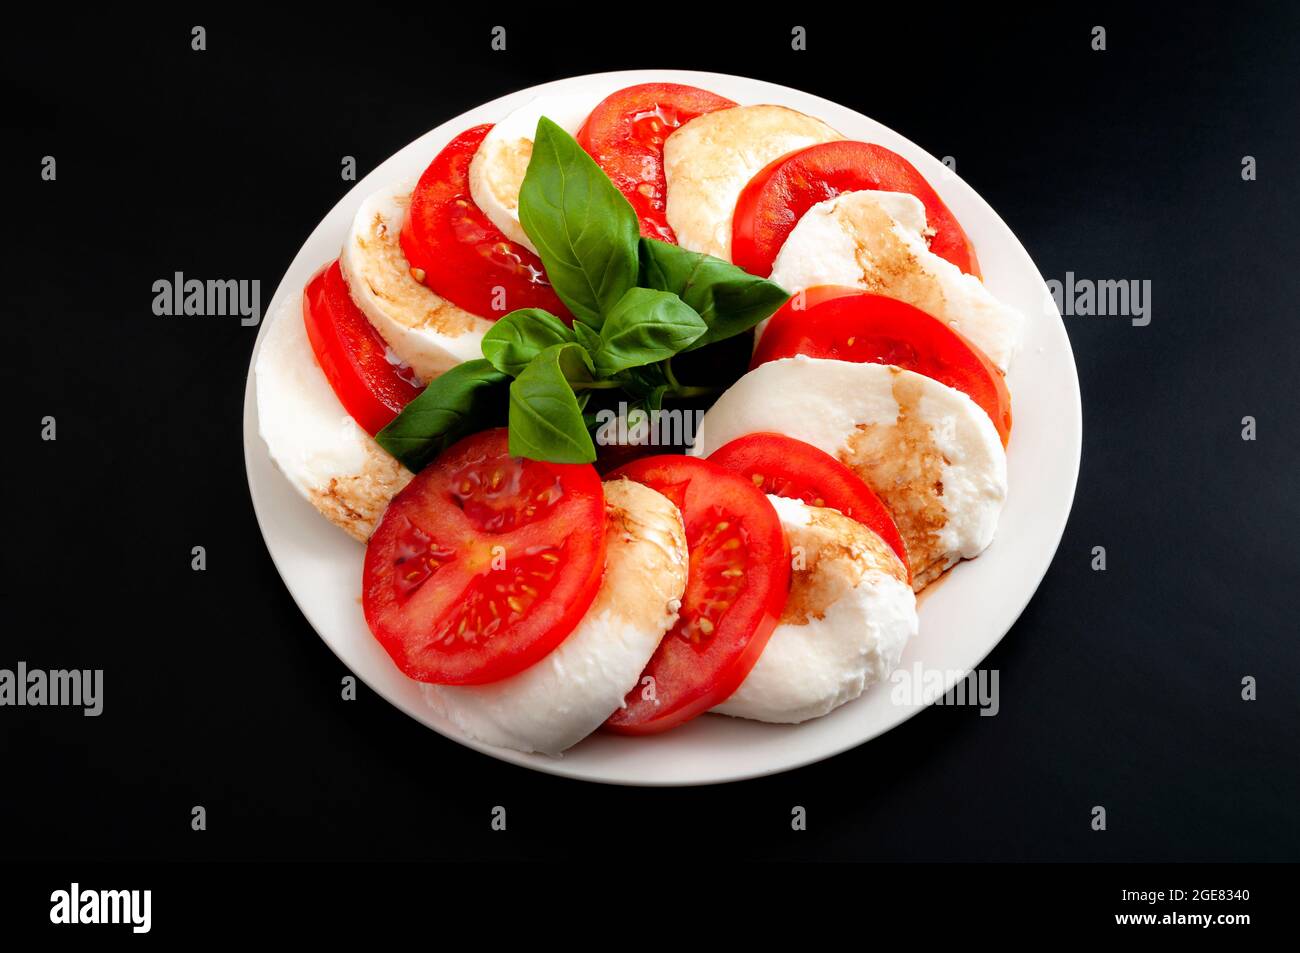 Mediterranean cuisine, fresh vegetarian food and italian culinary art concept with Caprese salad made of mozzarella cheese, tomatoes and basil leafs i Stock Photo